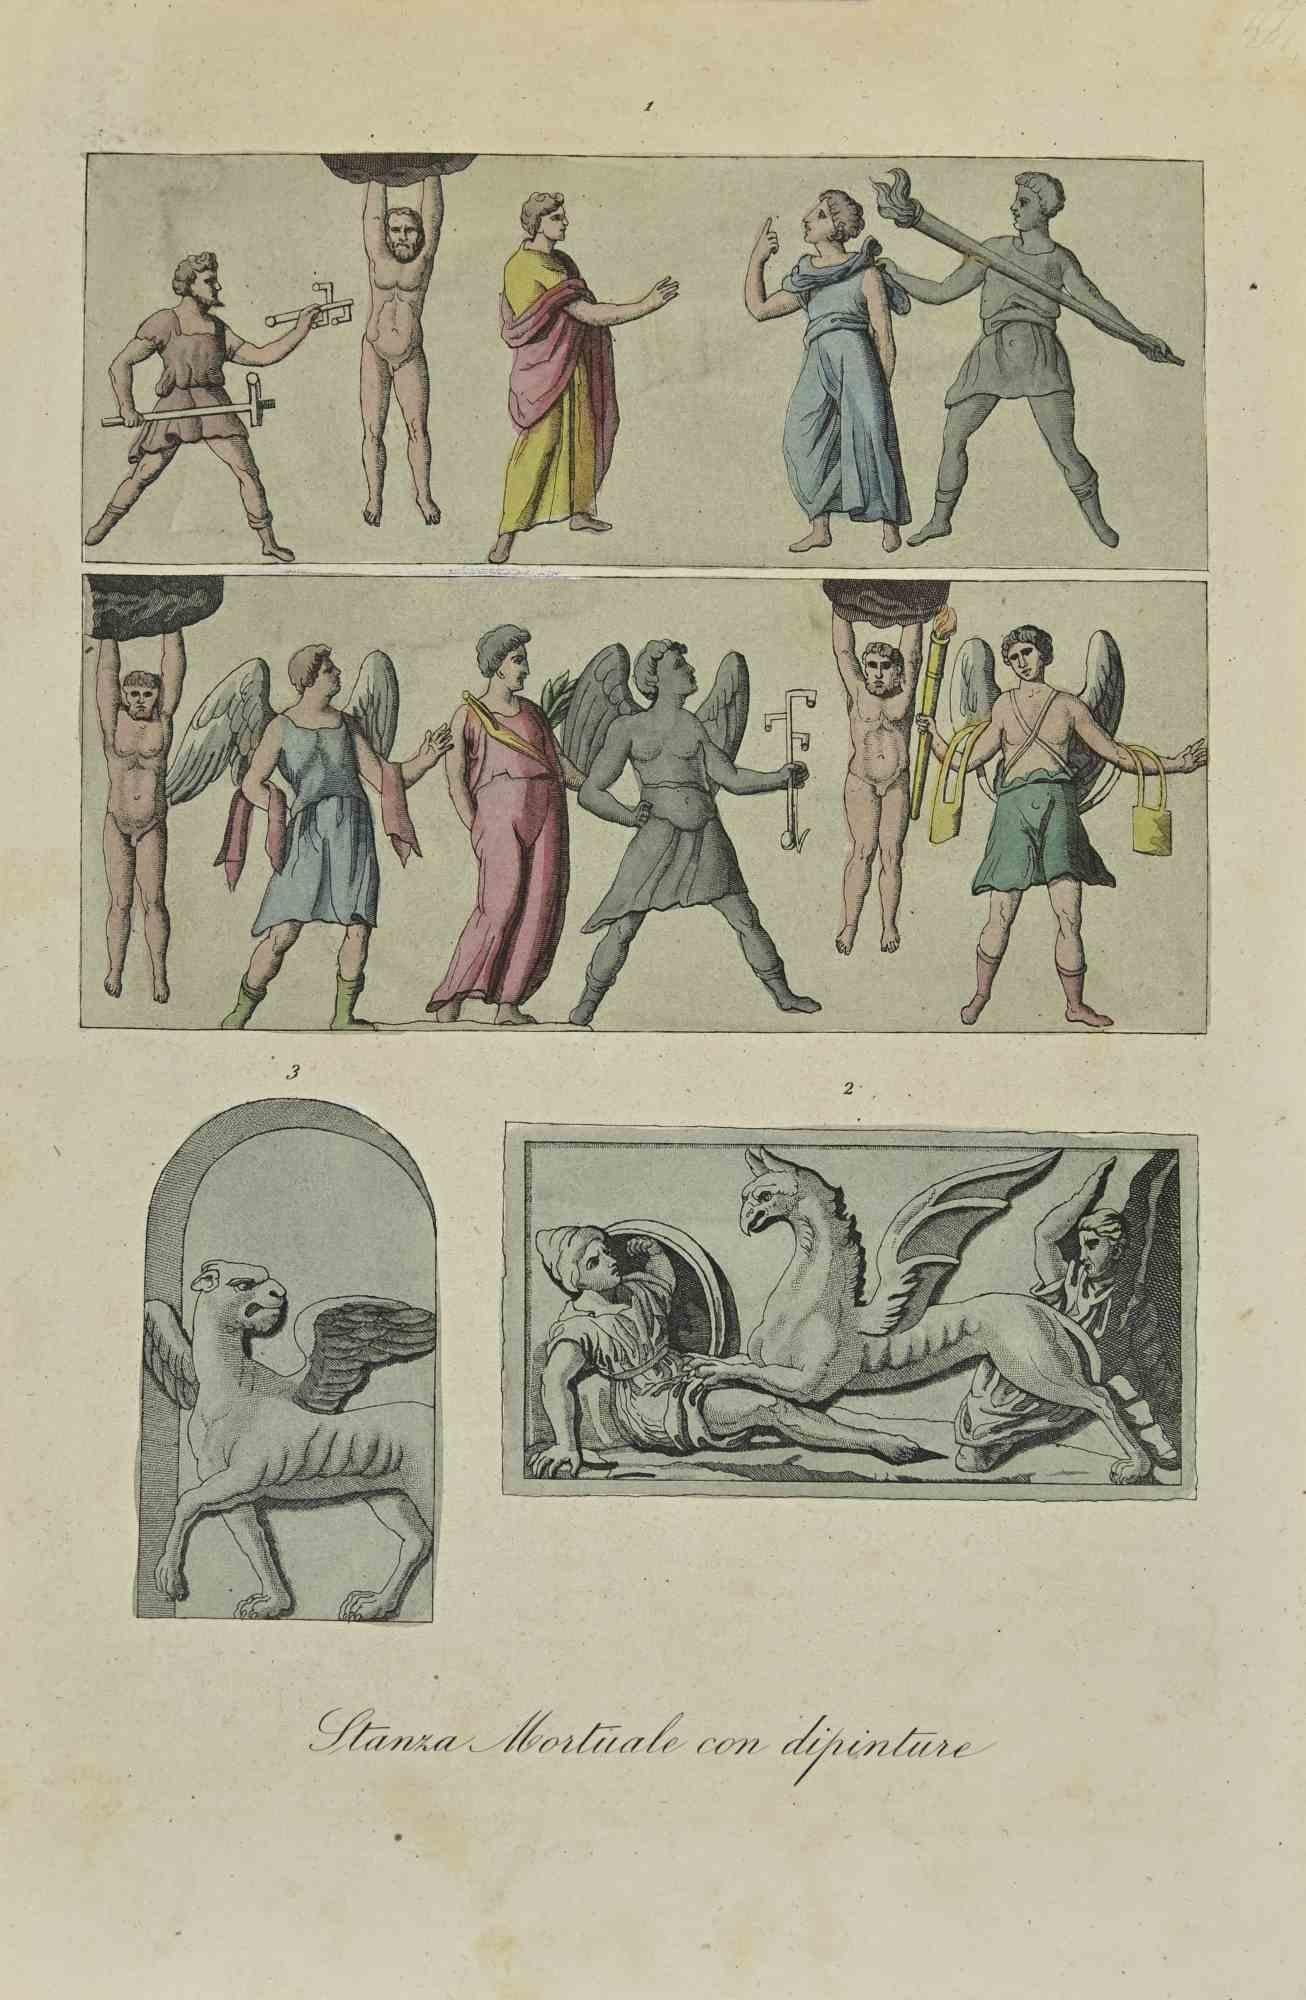 Various Artists Figurative Print - Uses and Customs - Angles and men - Lithograph - 1862